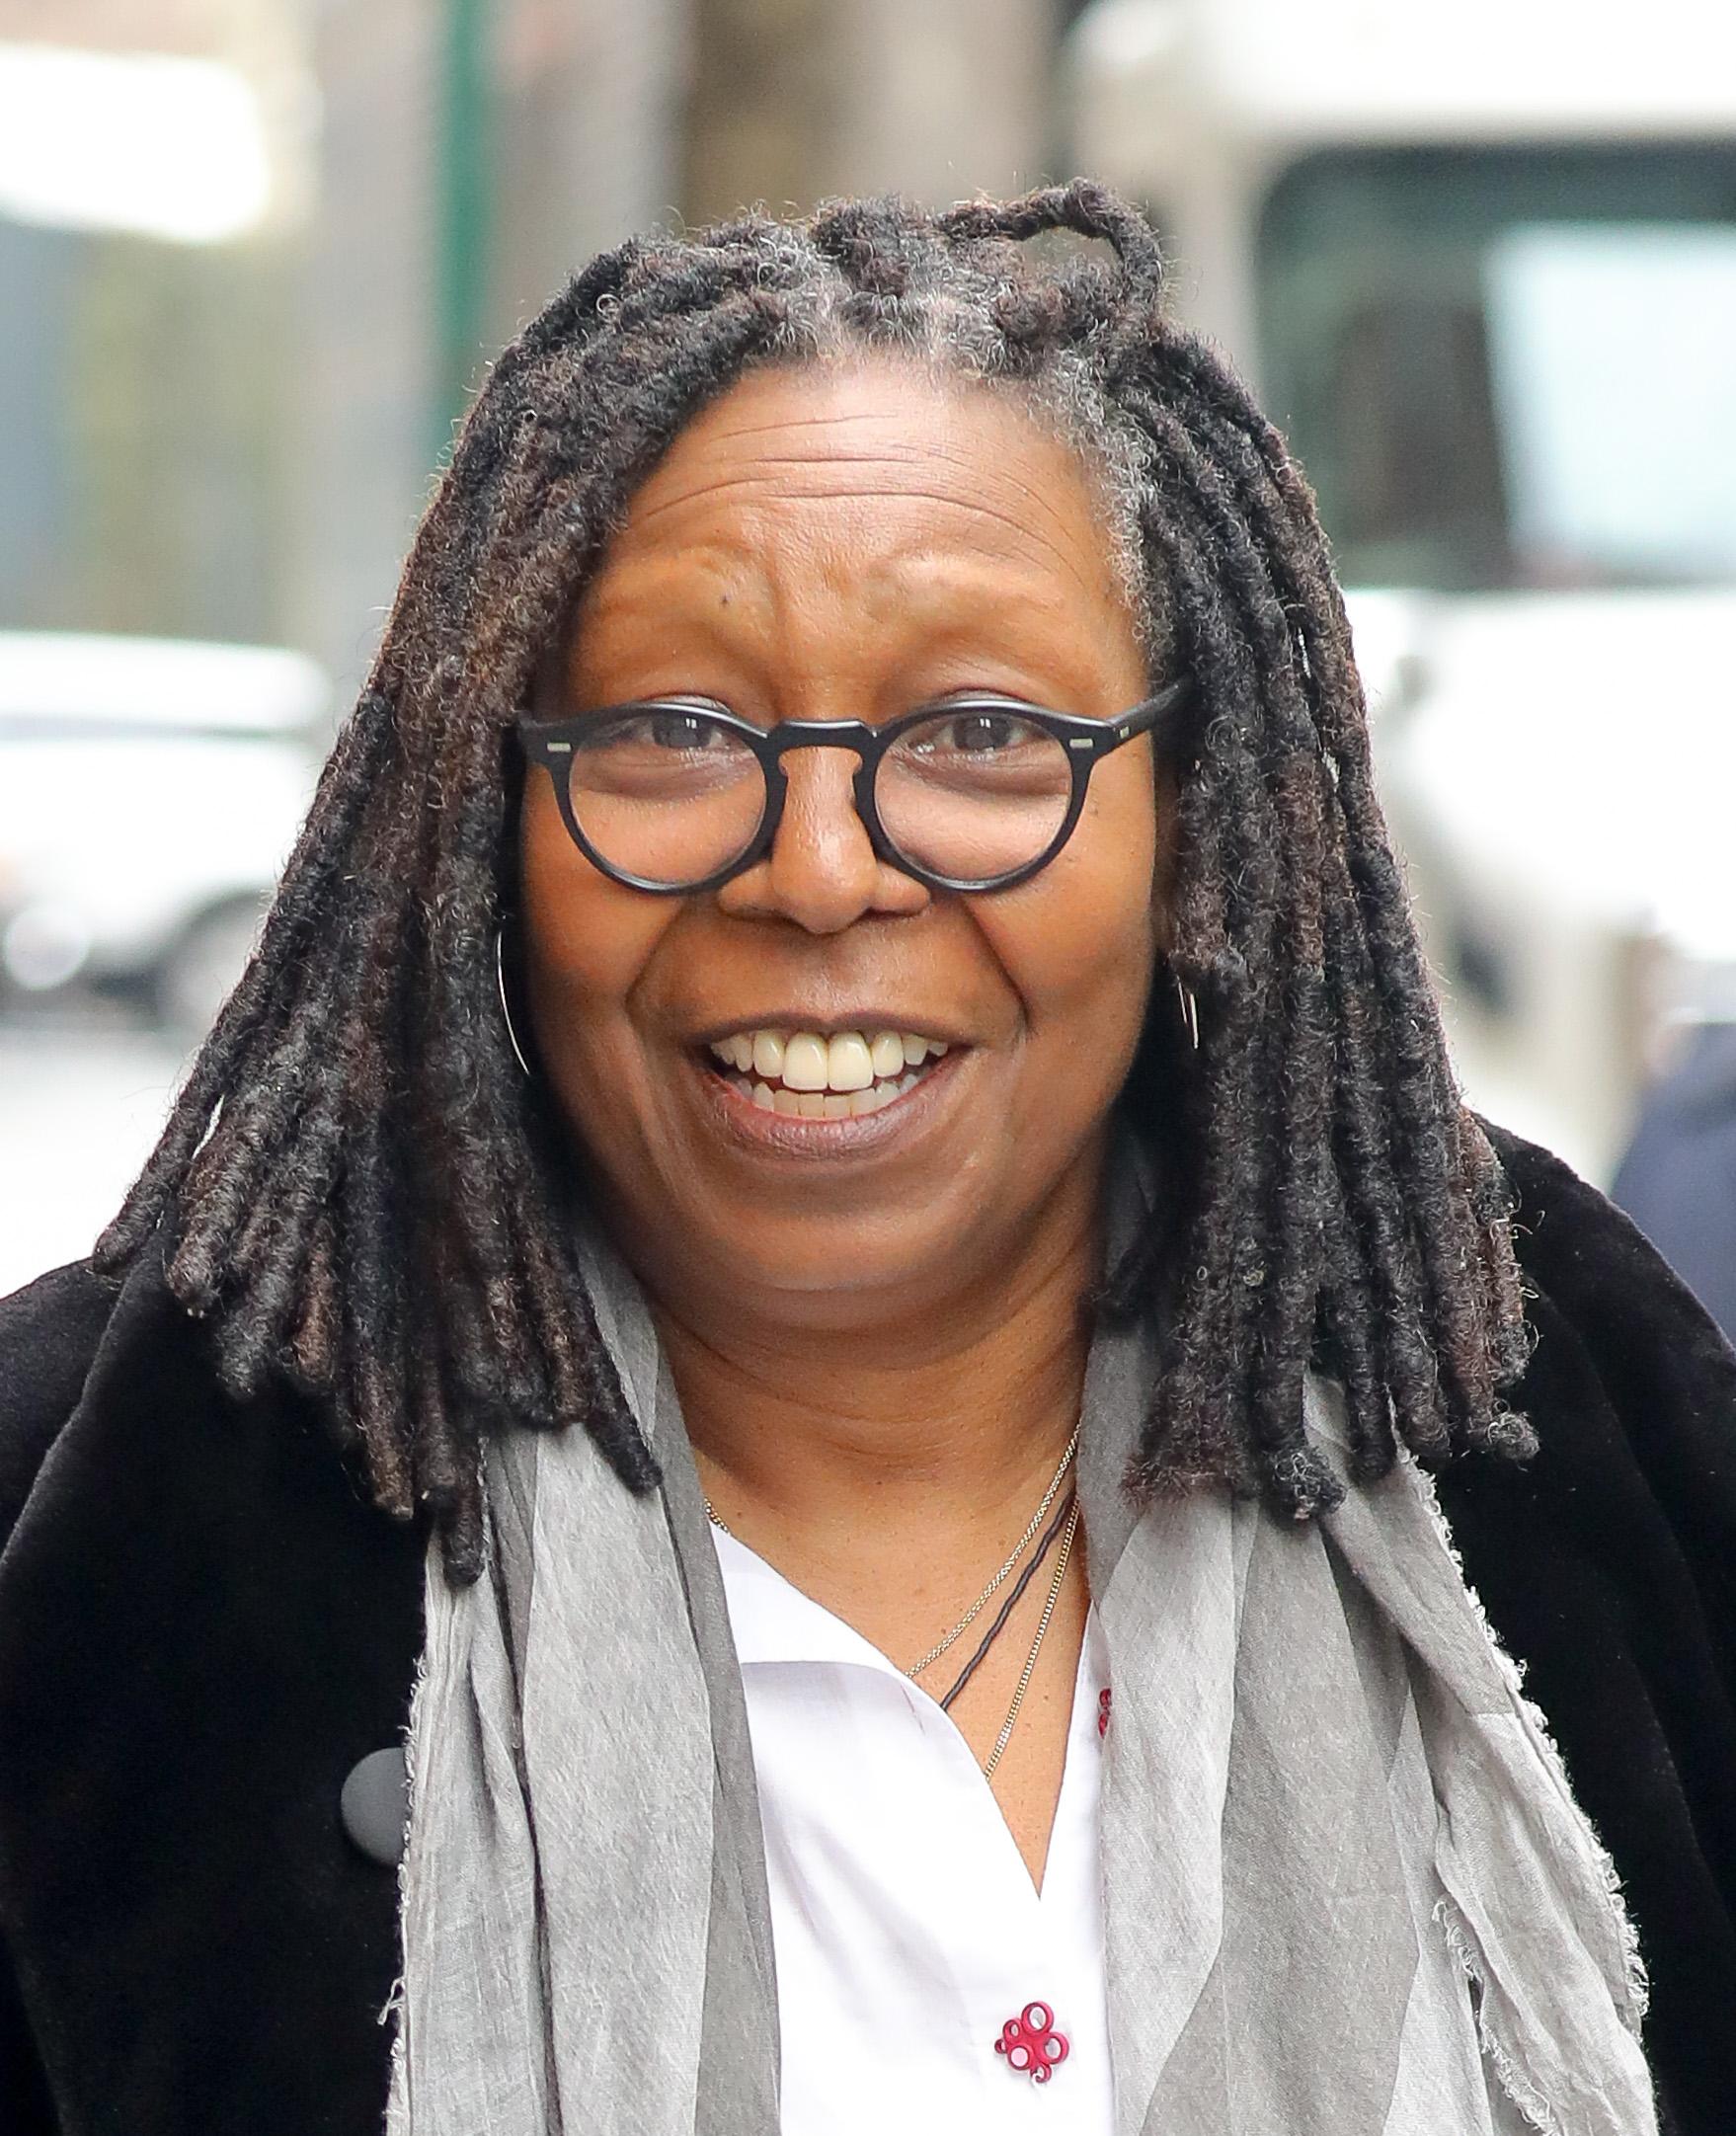 Whoopi Goldberg seen posing with the twins as leaving the view in NYC